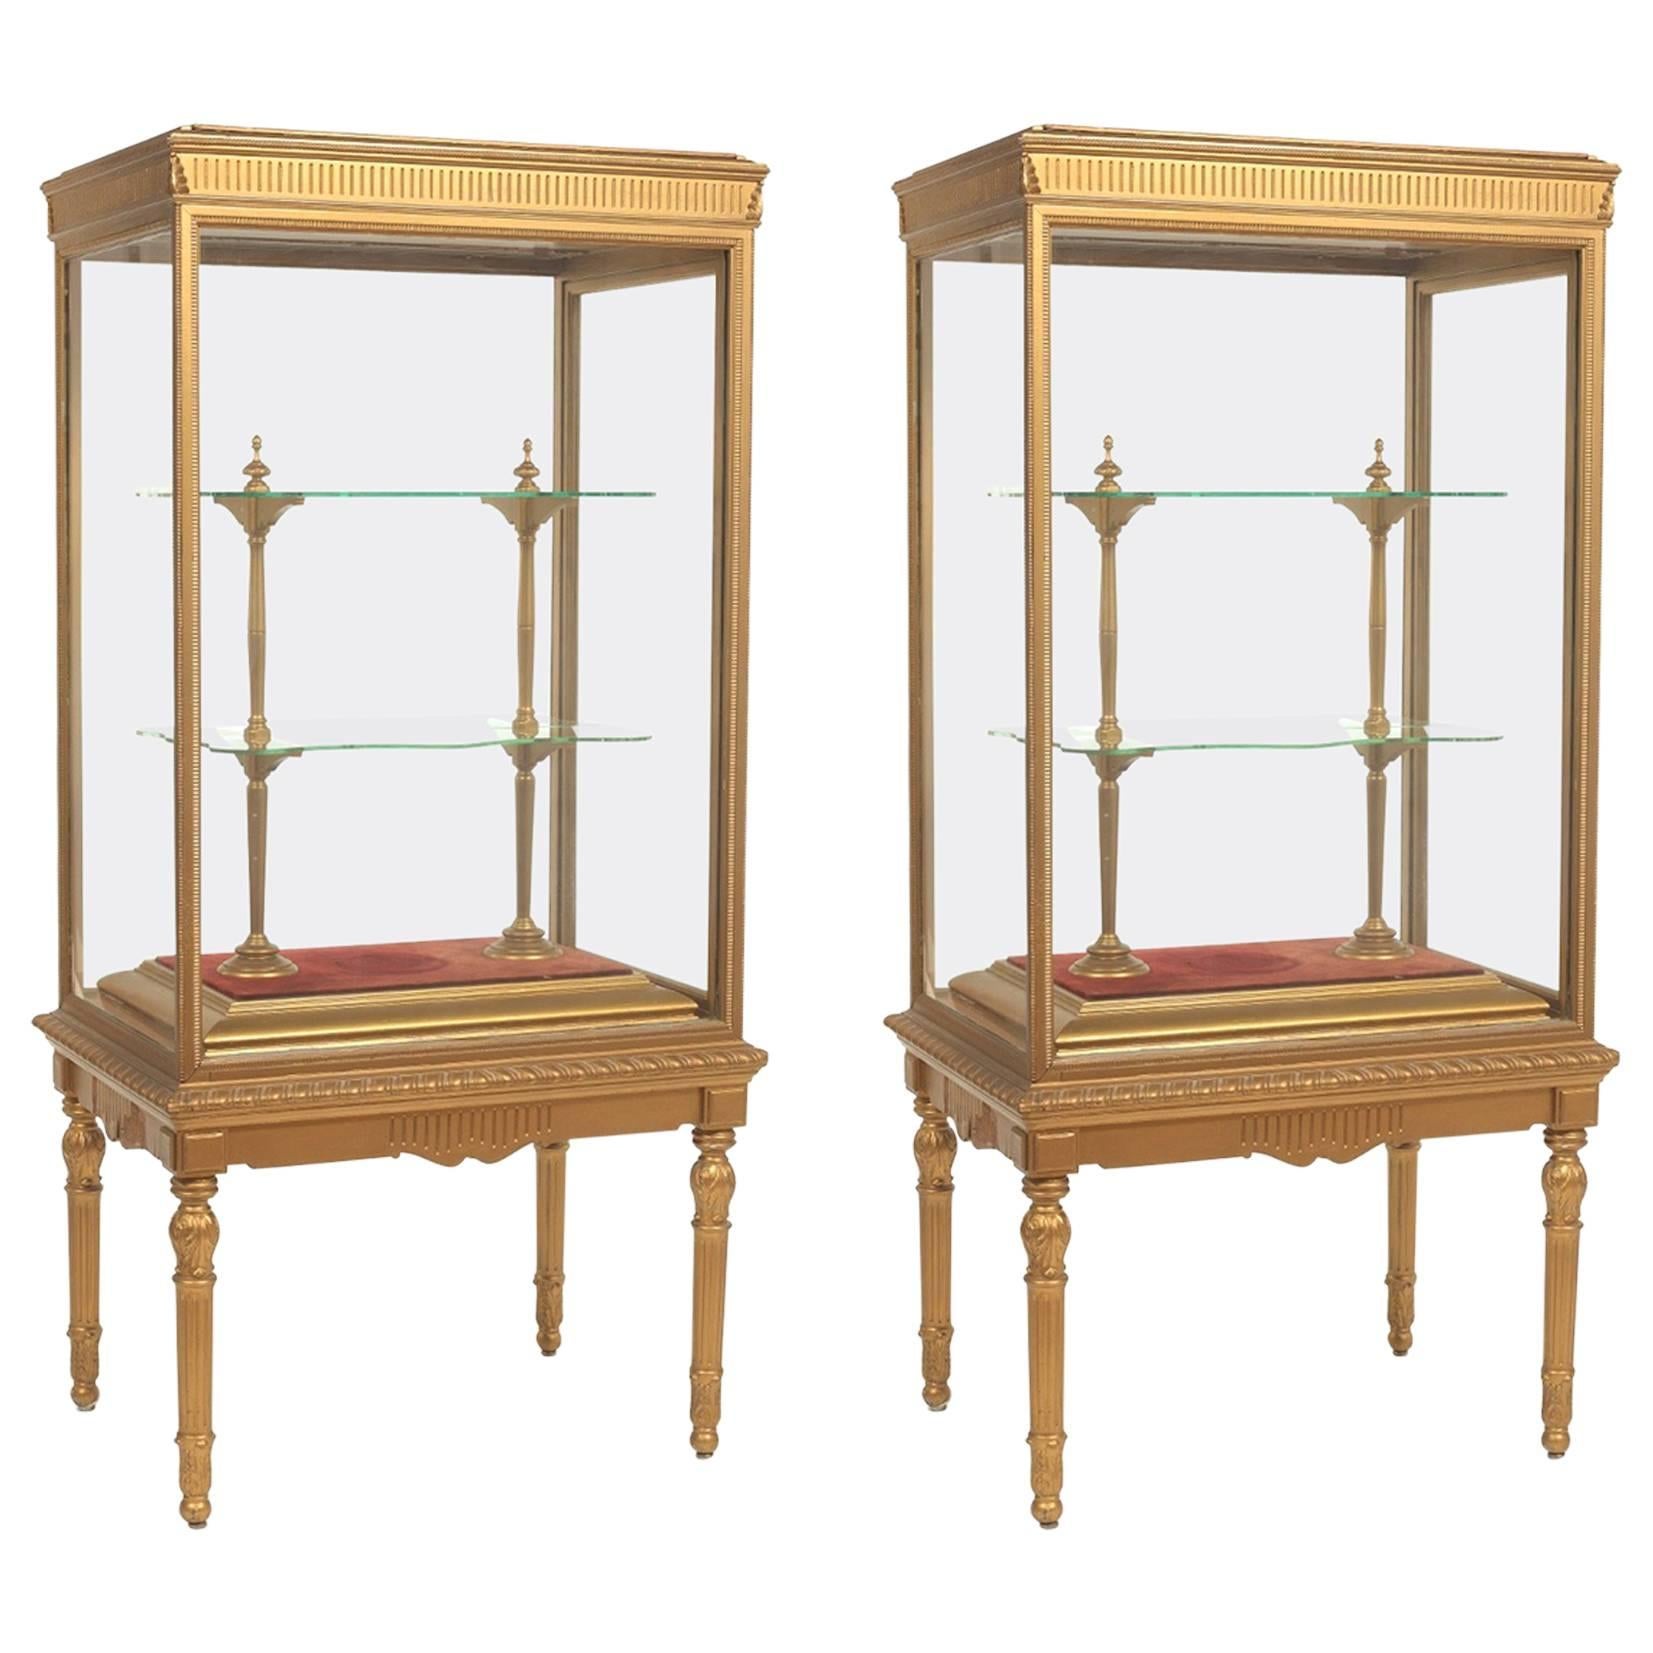 Pair of French Neoclassical Giltwood Standing Cabinets or Vitrines